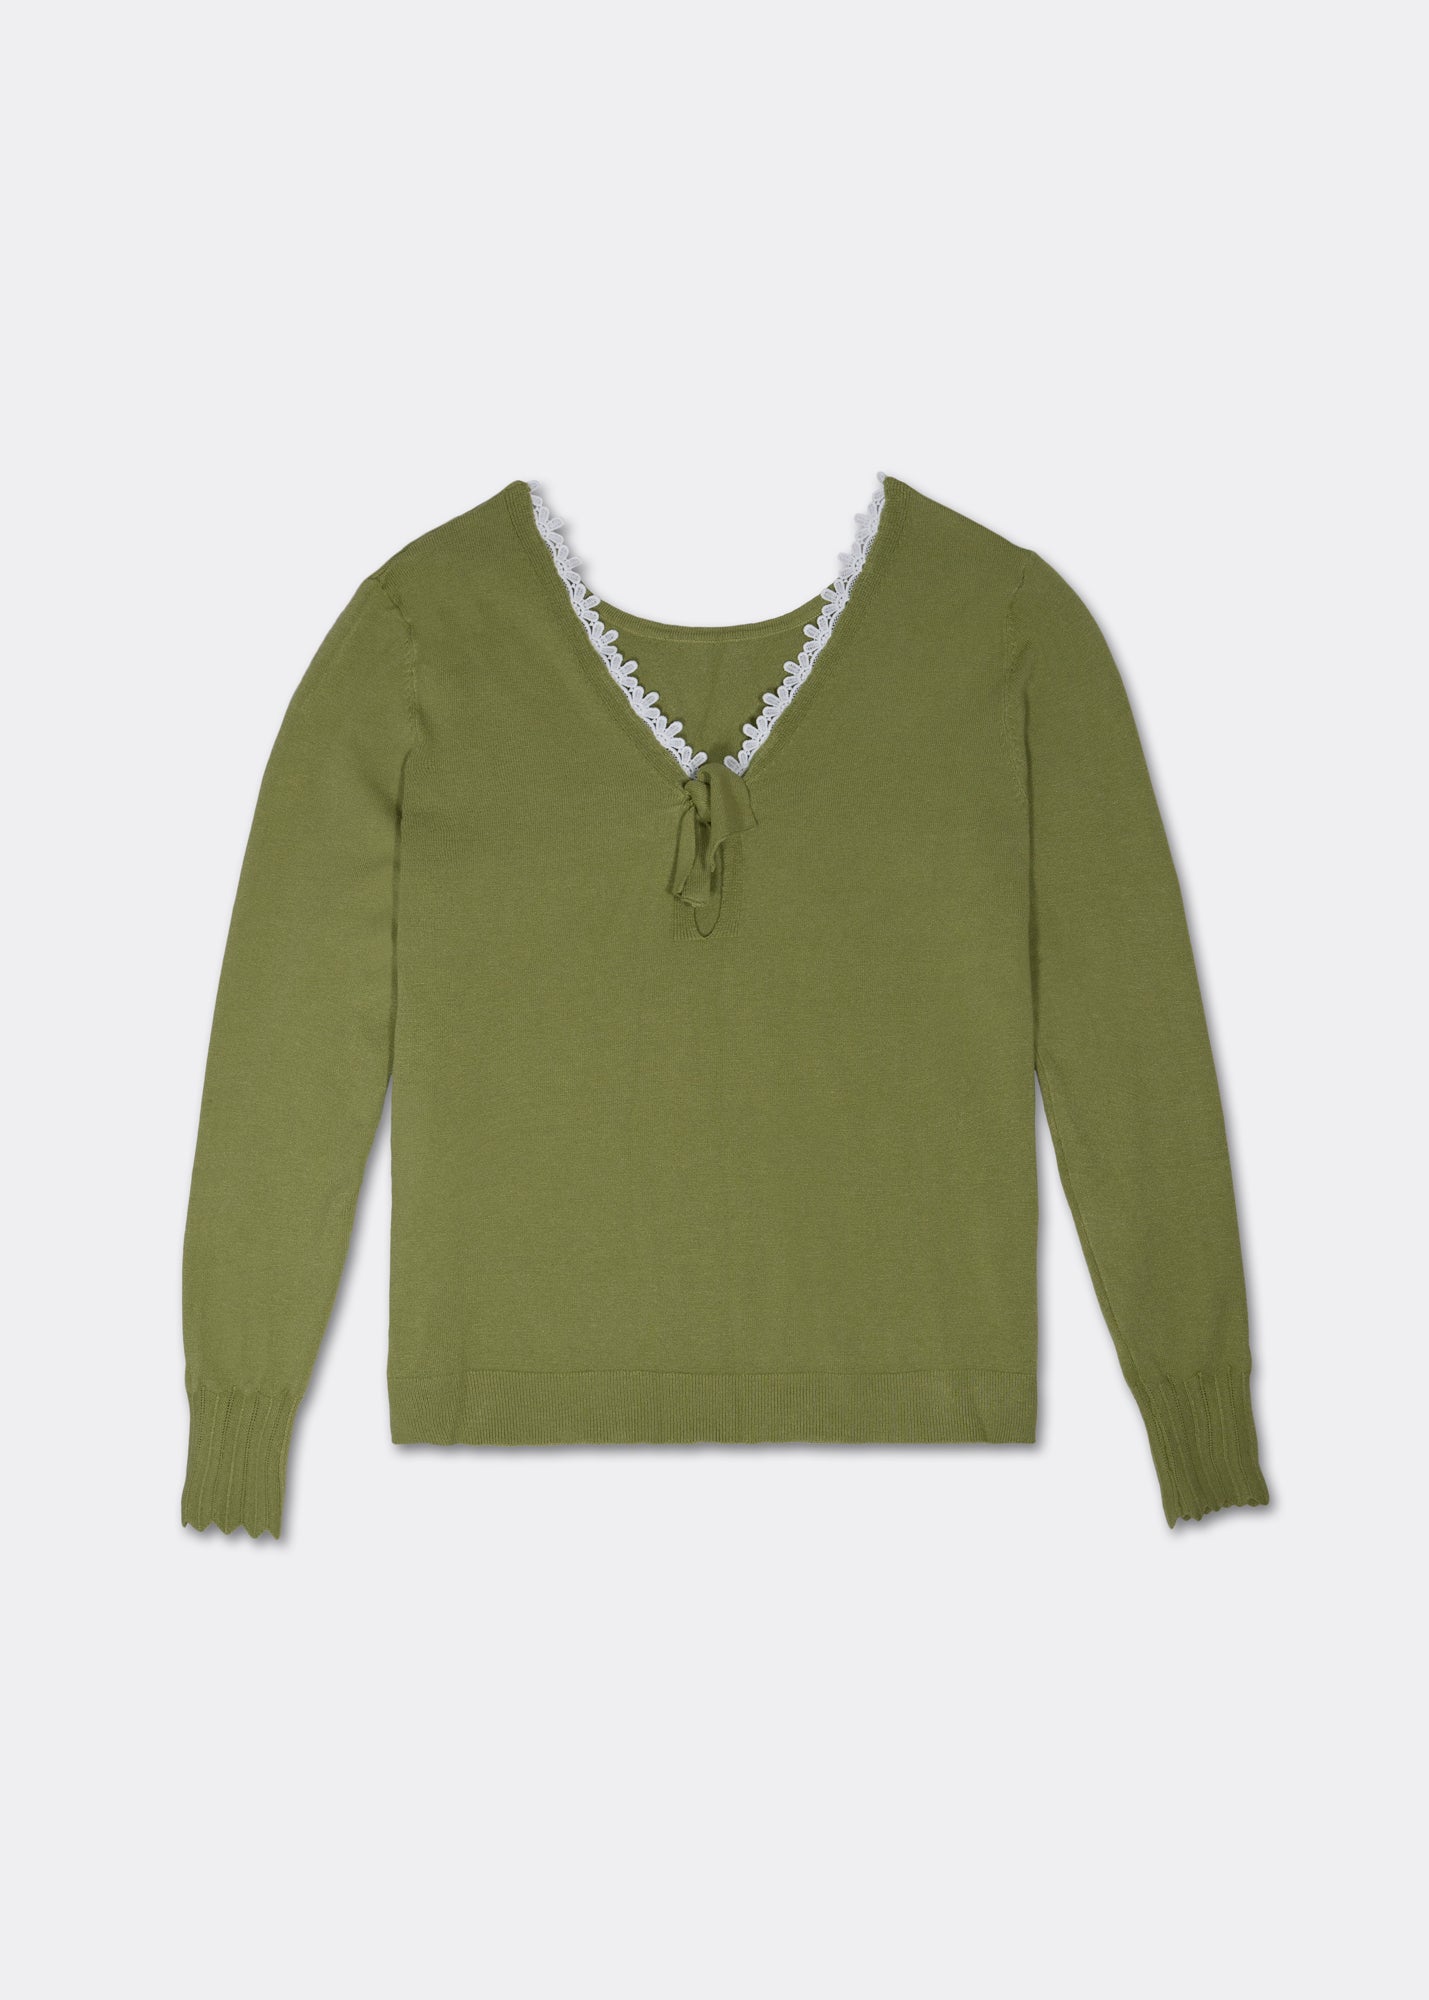 Viscose Knit with Lace and Bow Back in Olive - Tribute StoreTRIBUTE